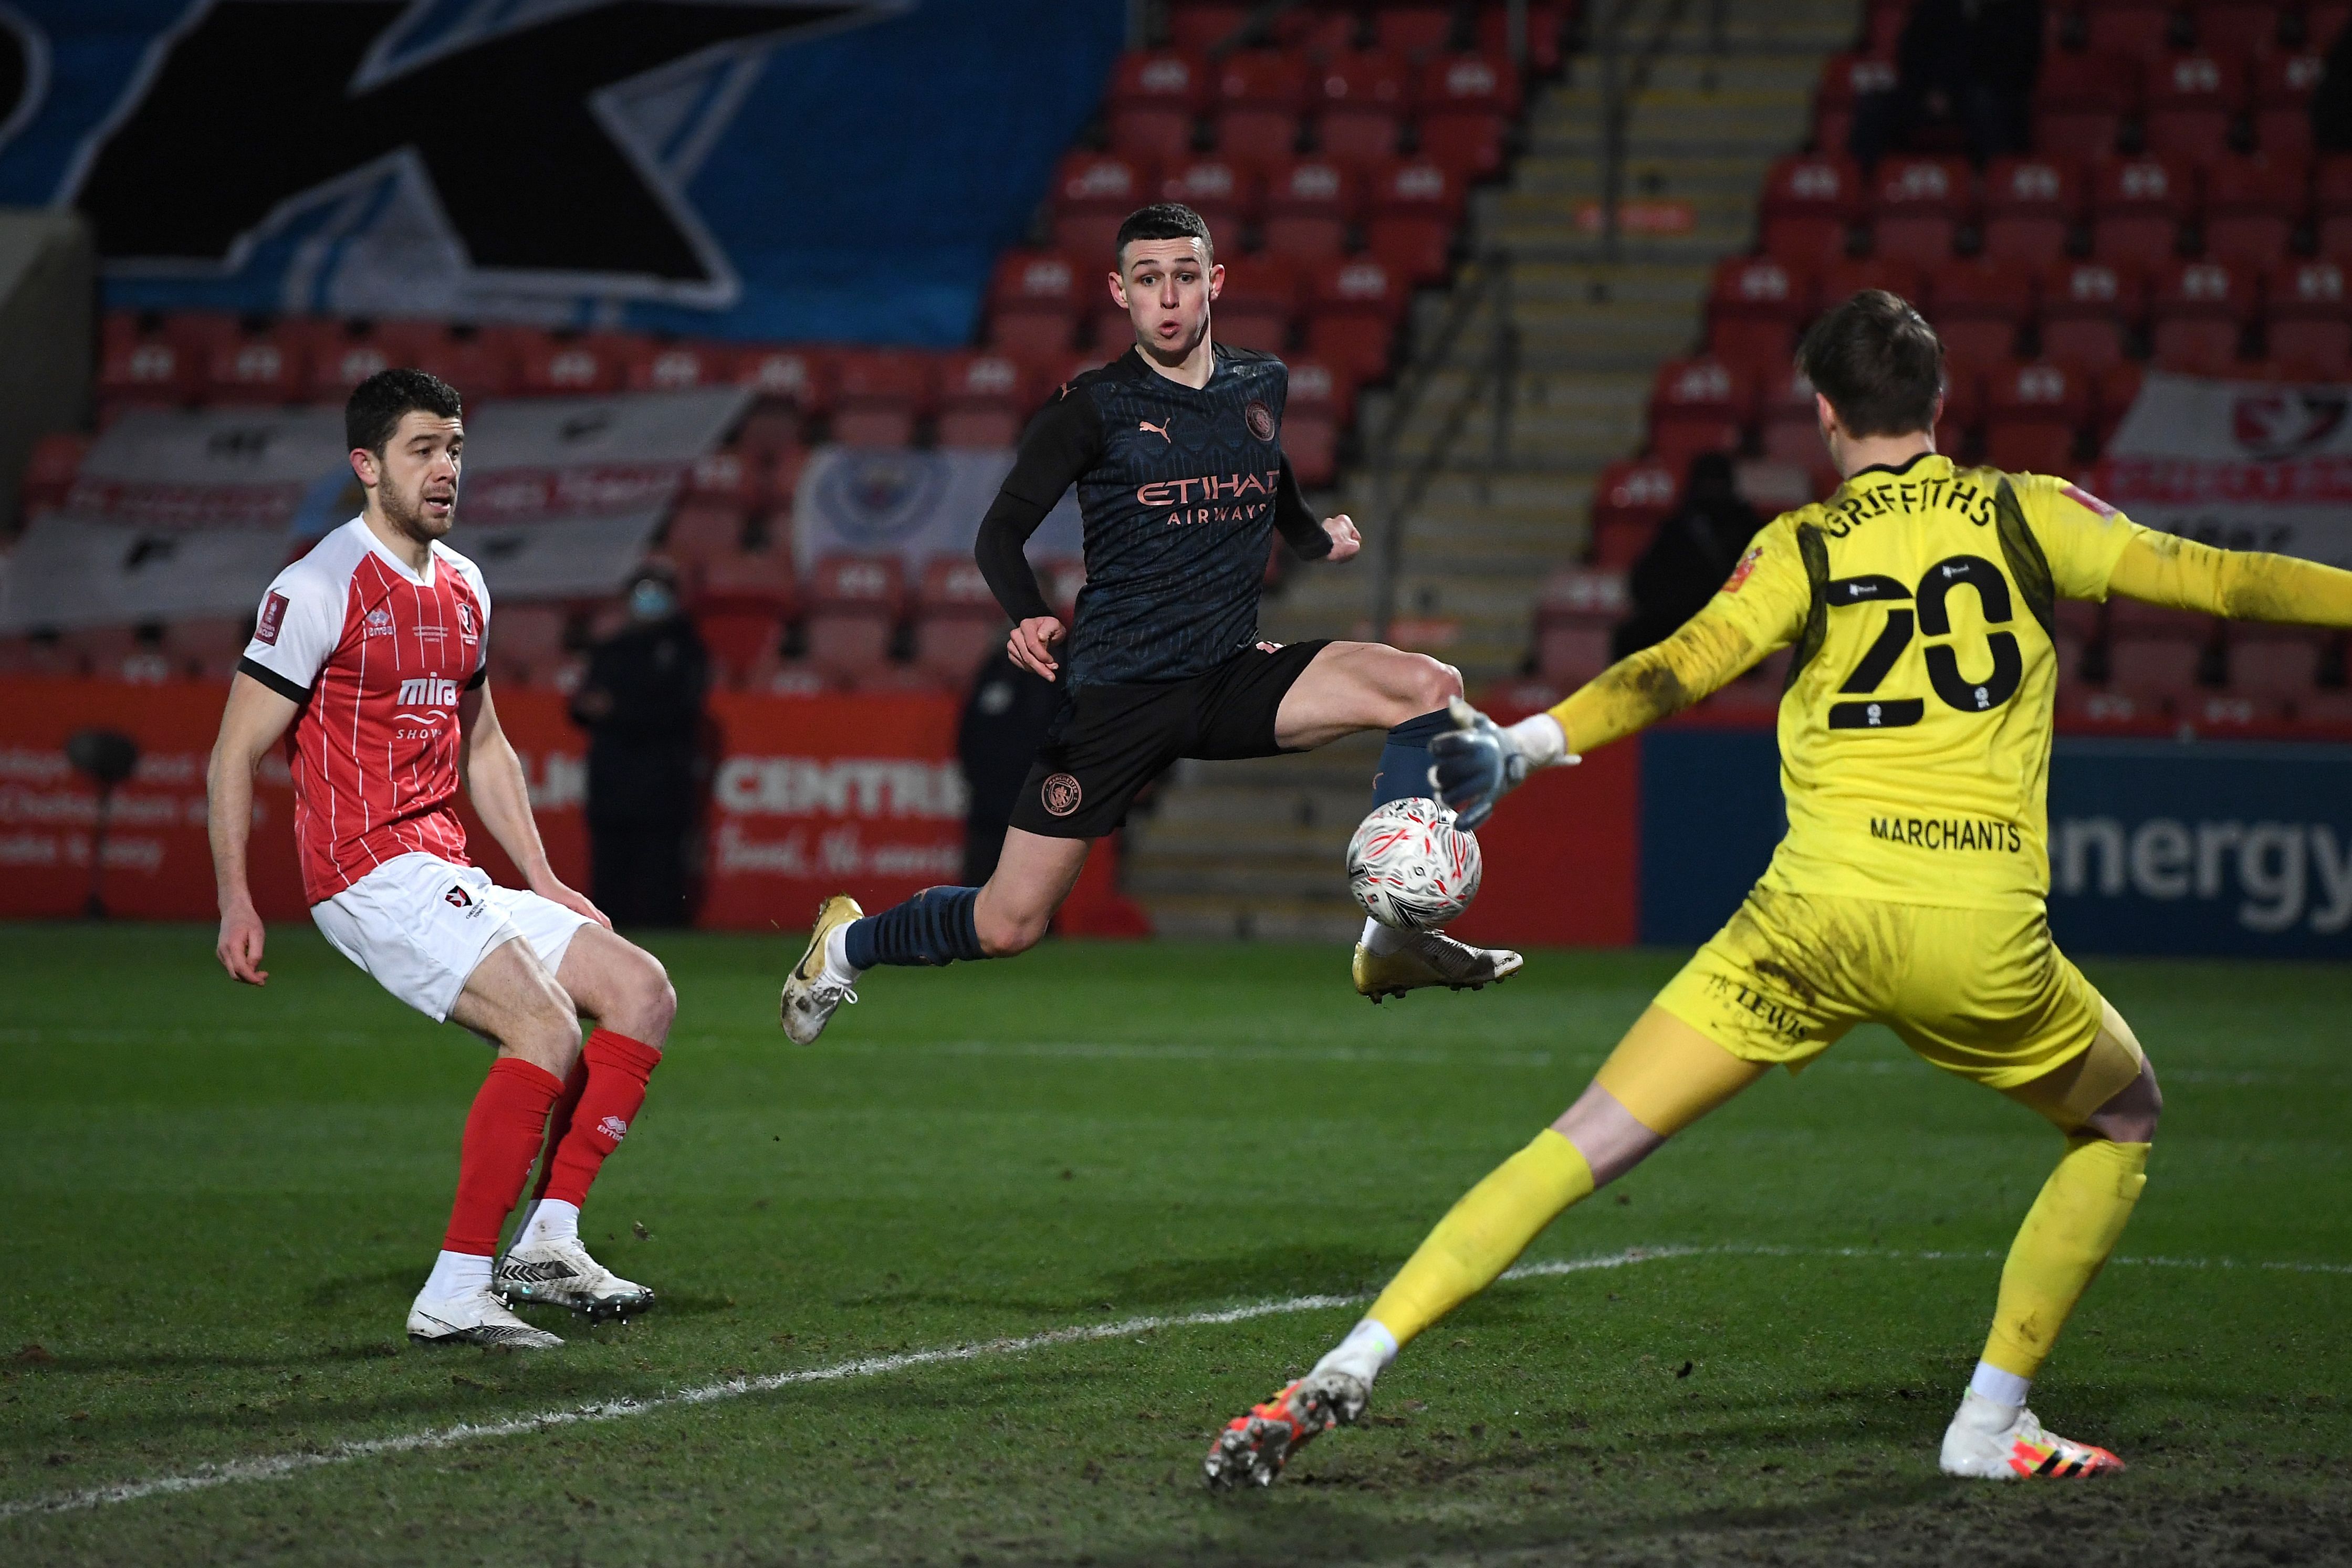 Manchester City's English midfielder Phil Foden (C) shoots to score their first goal during the English FA Cup fourth round football match between Cheltenham Town and Manchester City at The Jonny-Rocks Stadium in Cheltenham, central England. Credit: AFP Photo